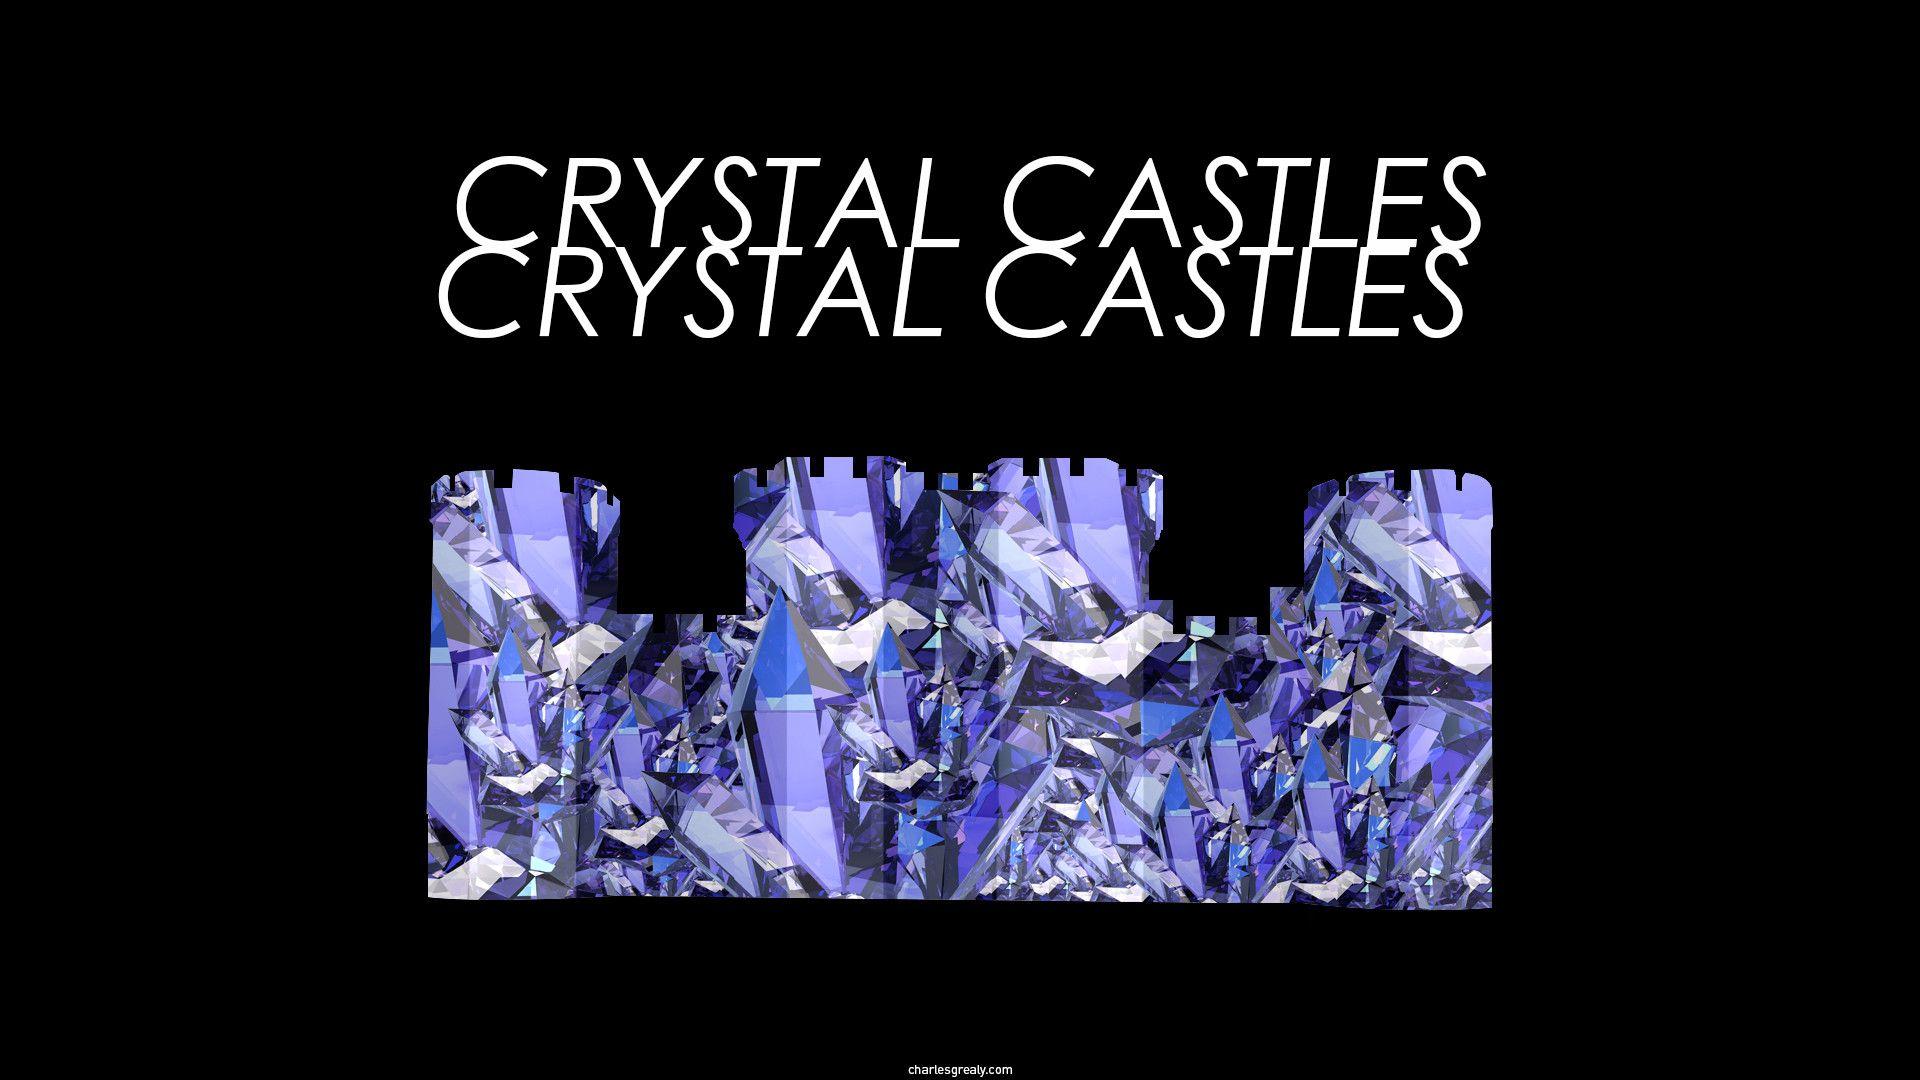 Made this in respect to the great sounds of Crystal Castles